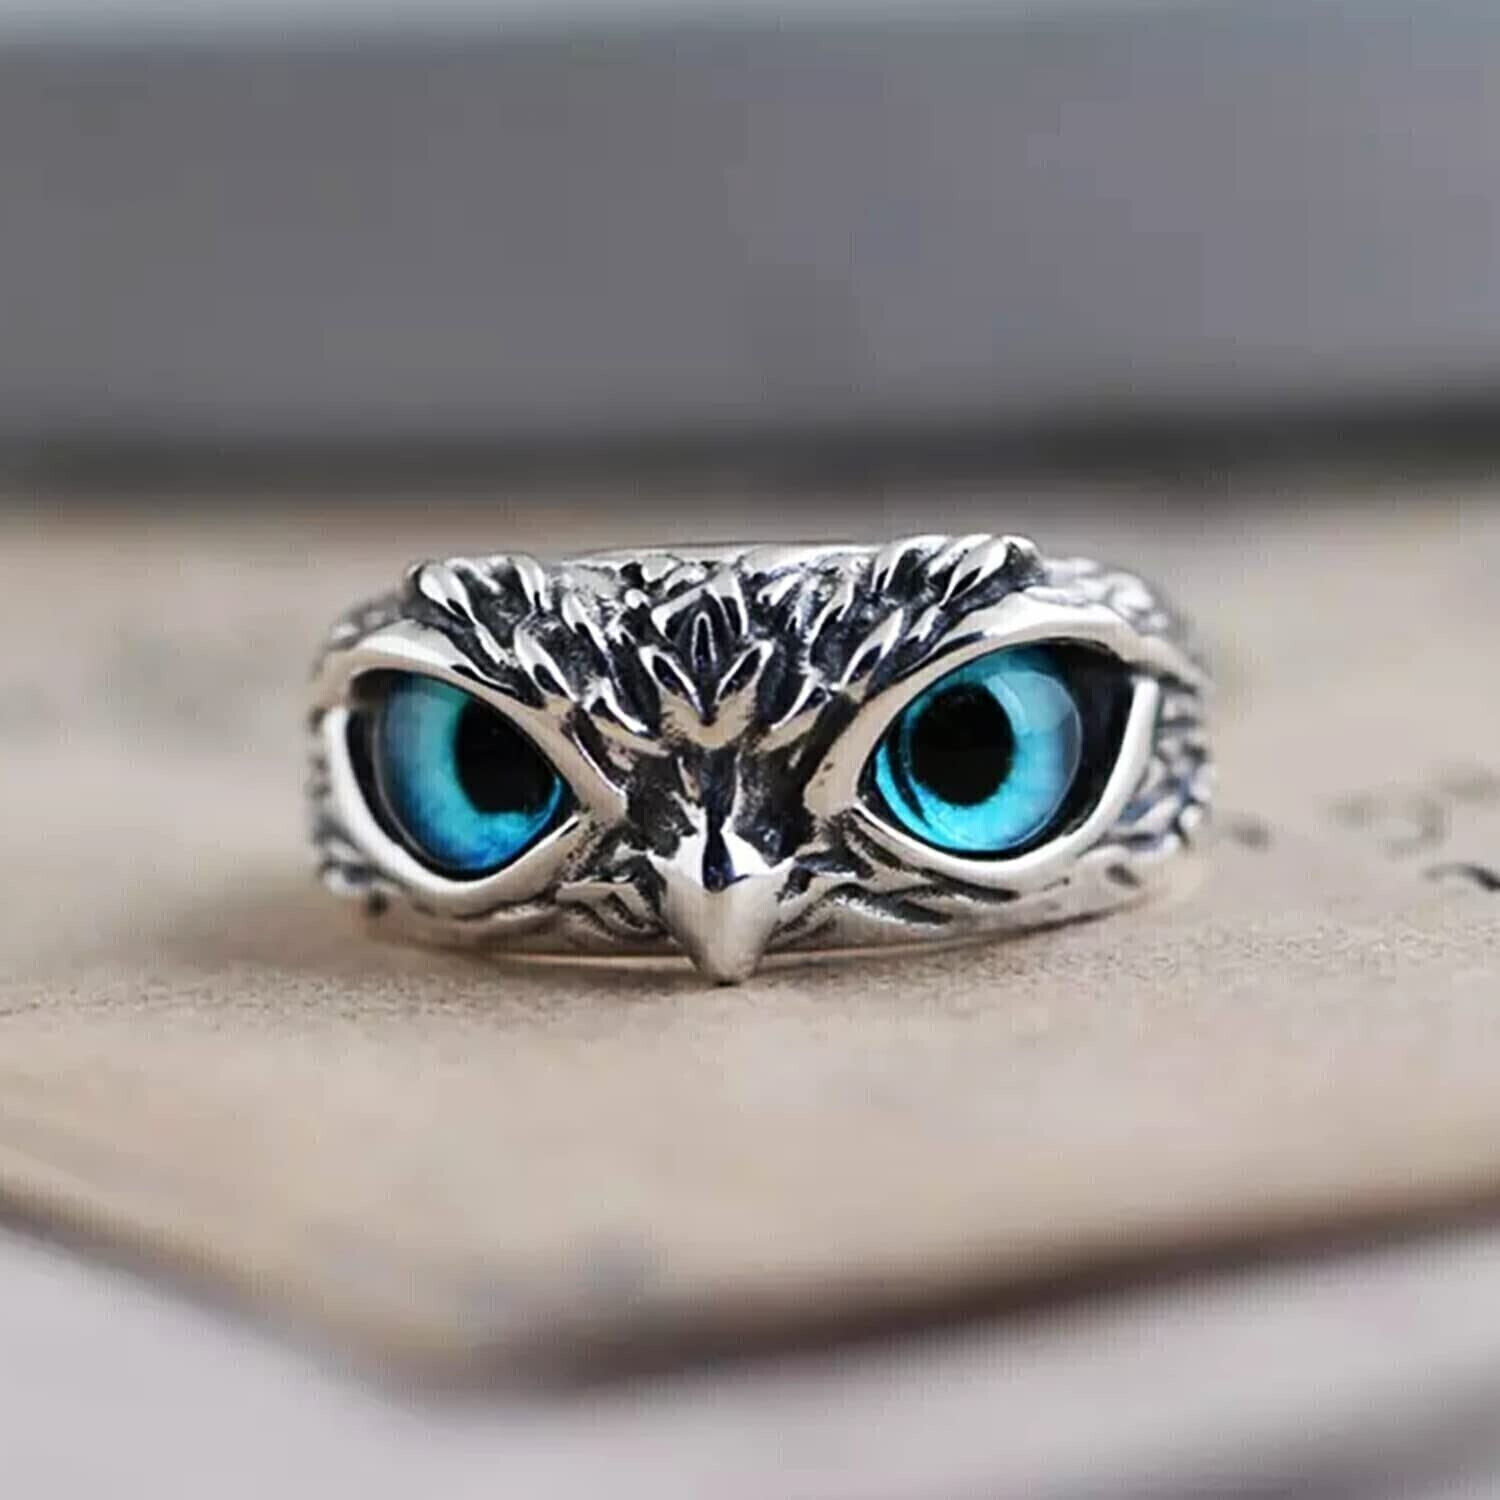 Blessed 100 % Work Stylish Owl Skull Stylish Silver King Owl Ring Good luck A+